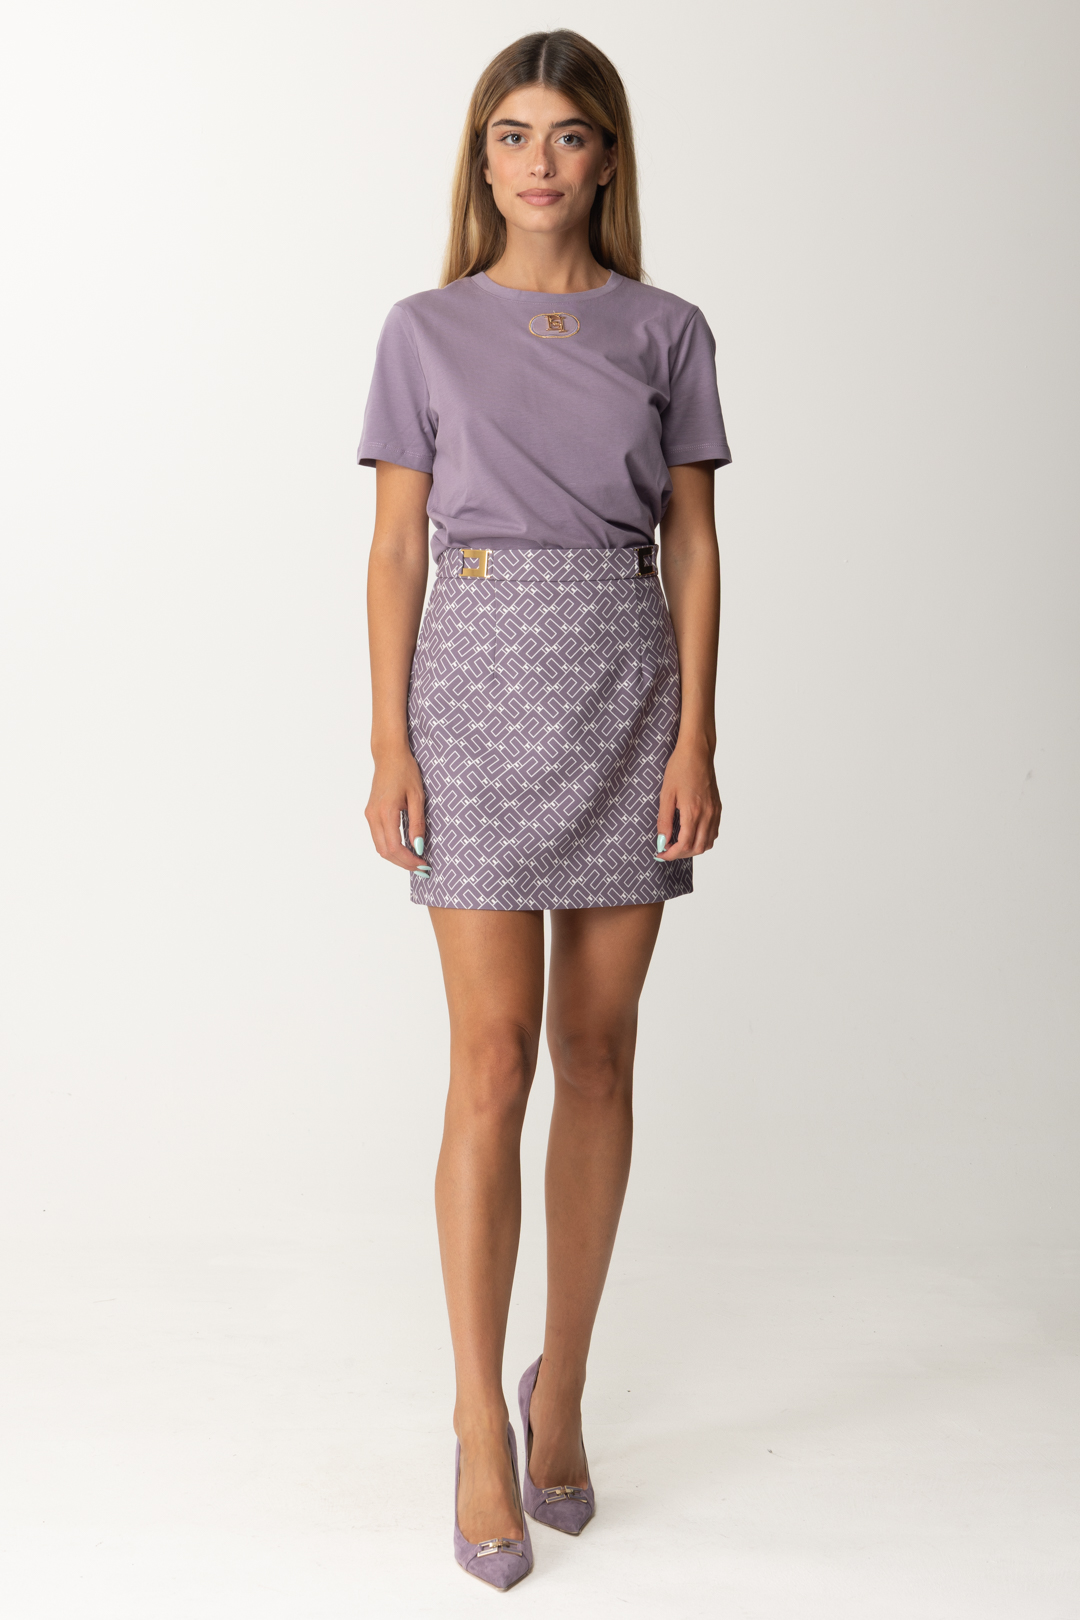 Anteprima: Elisabetta Franchi T-shirt con placca logo in velluto CANDY VIOLET